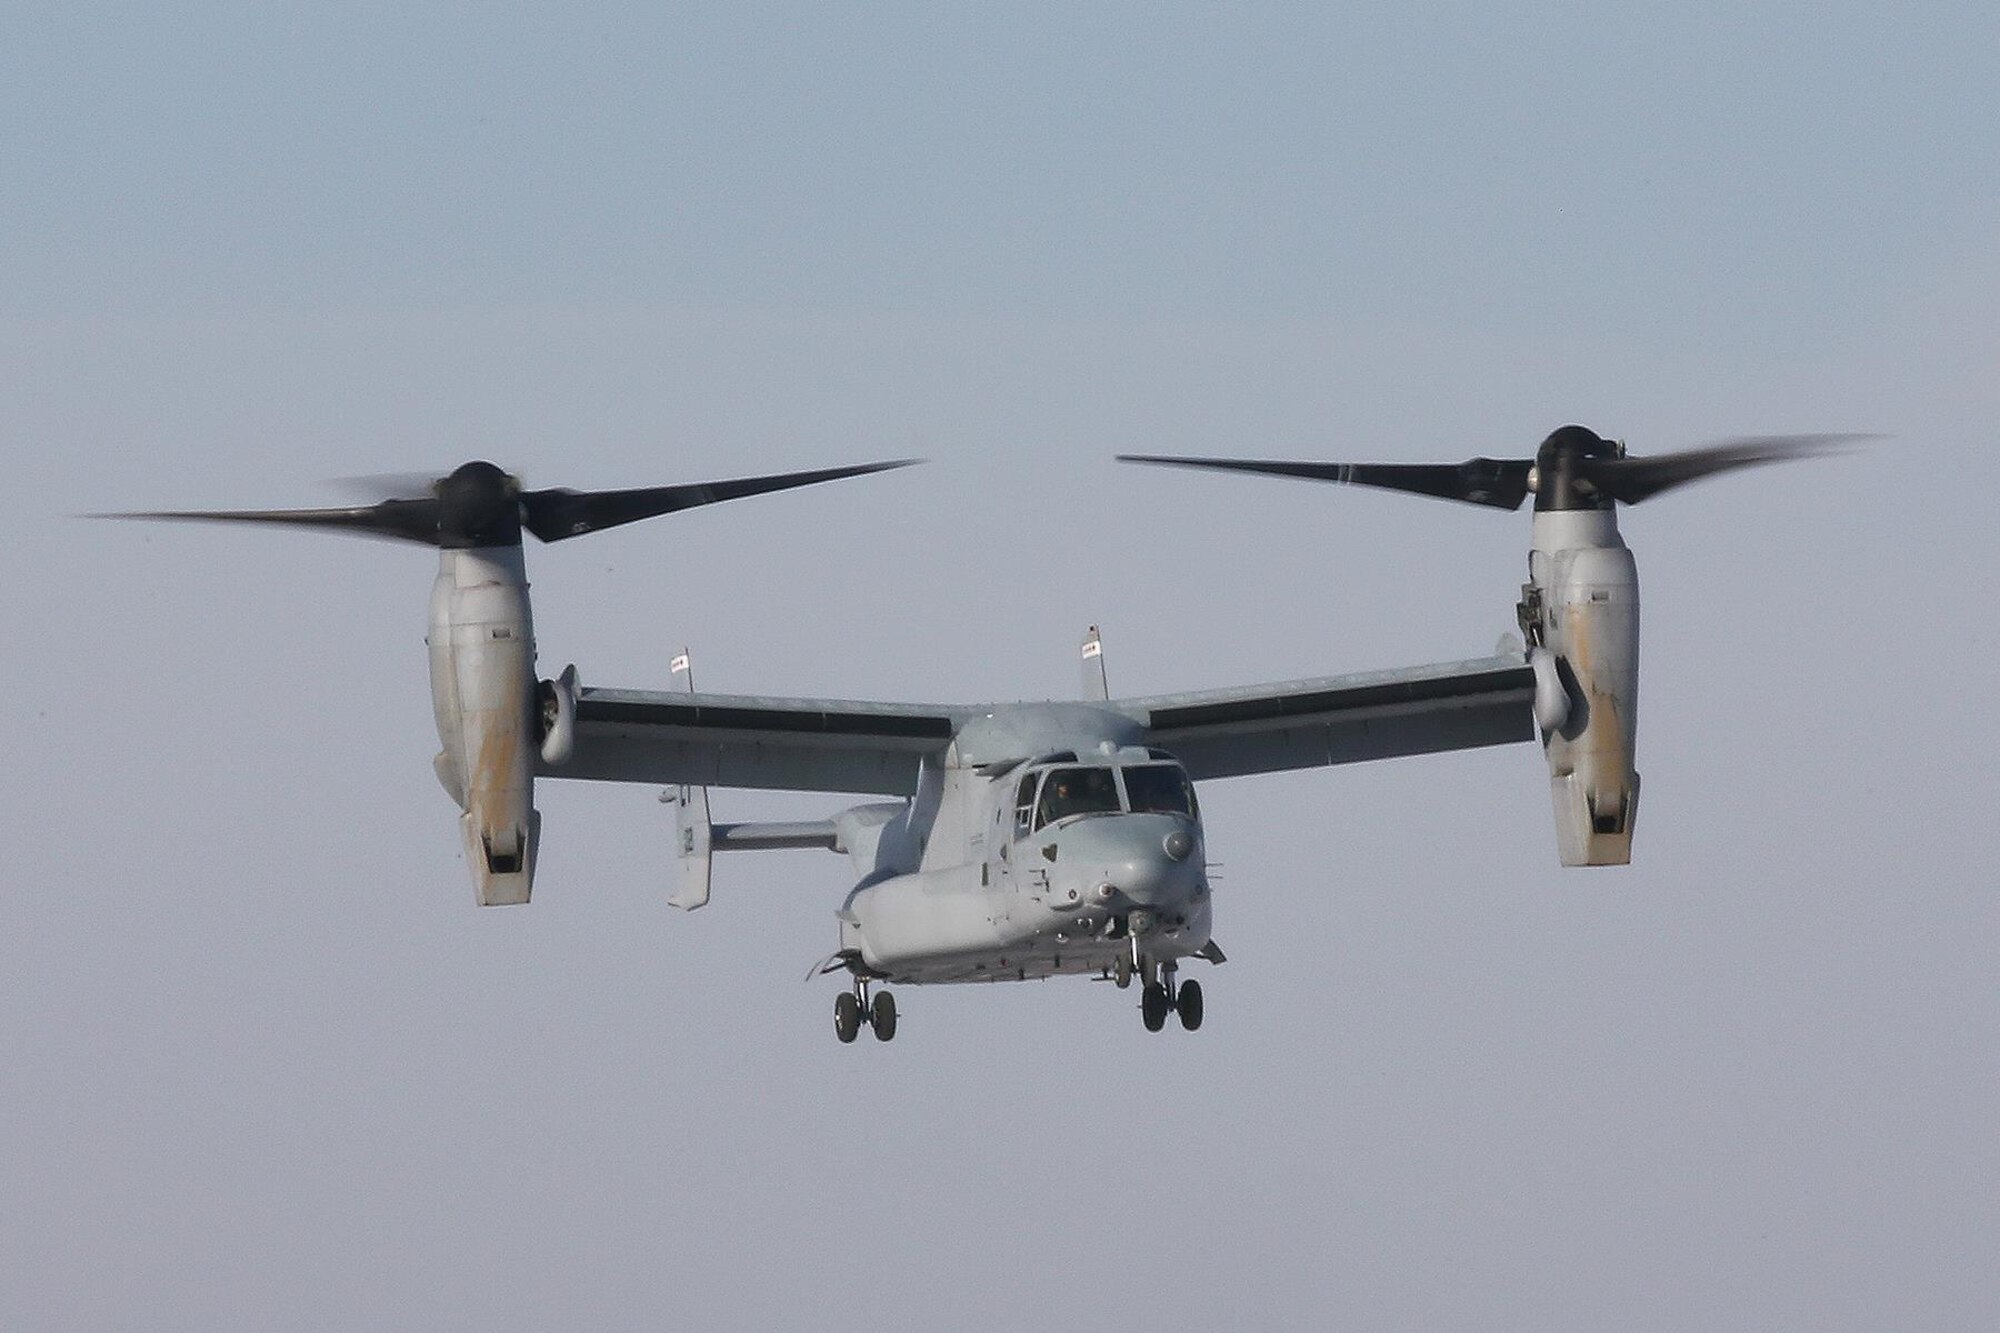 The Bell-Boeing CV-22B Osprey landed at the National Museum of the U.S. Air Force Dec. 12, 2013, at Wright-Patterson Air Force Base, Dayton, Ohio. (U.S. Air Force photo/Don Popp)